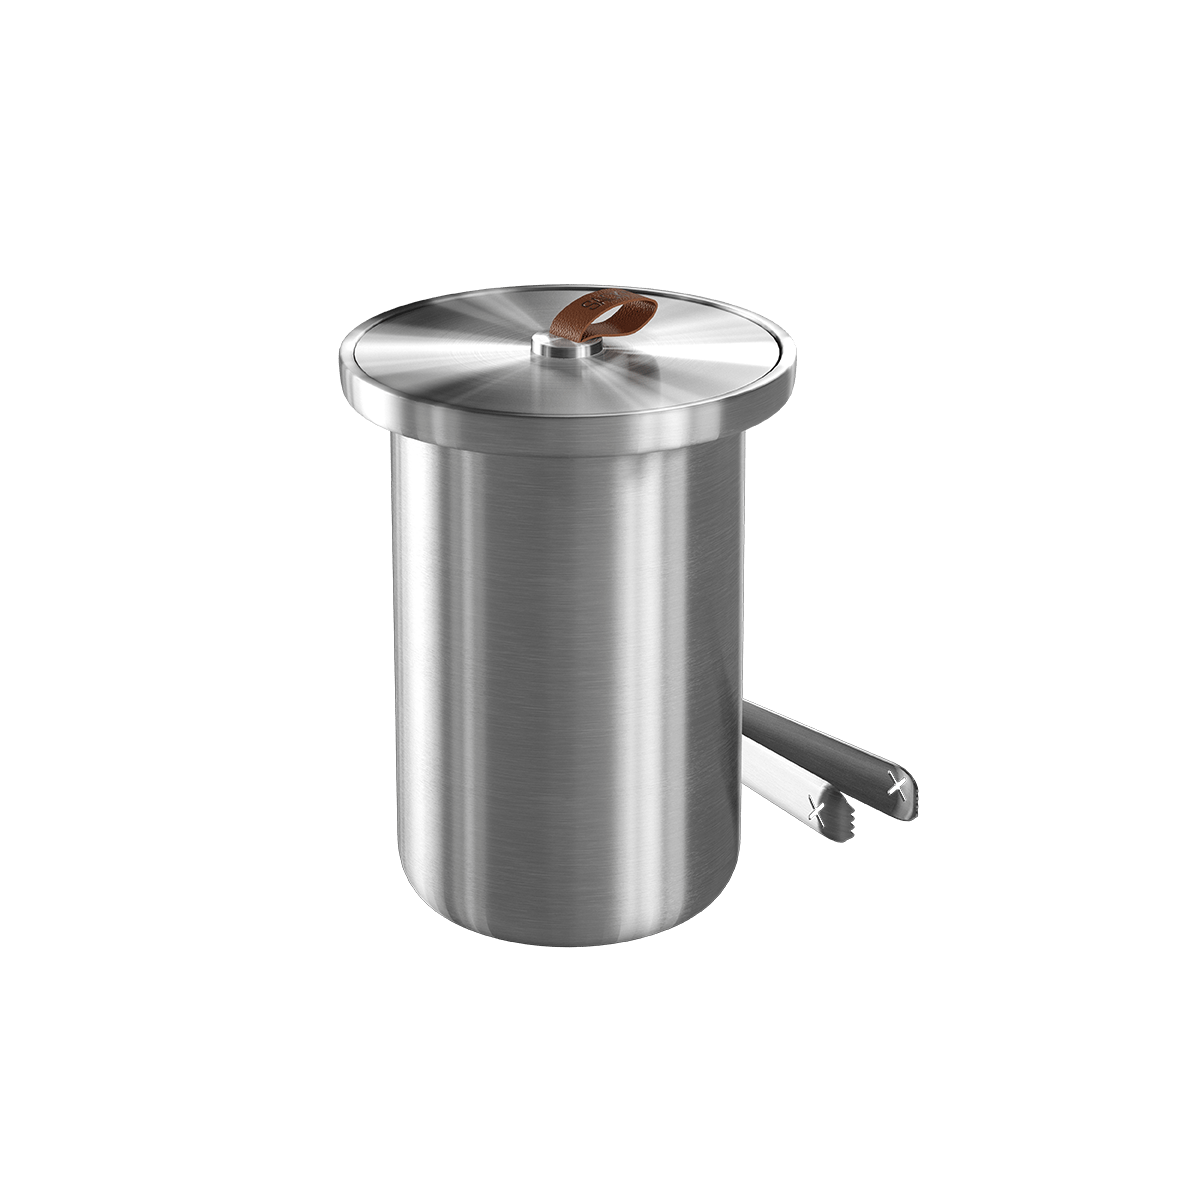 variant_8583600% | Wine Cooler - Ø14 [Contract] - Stainless steel | SACKit